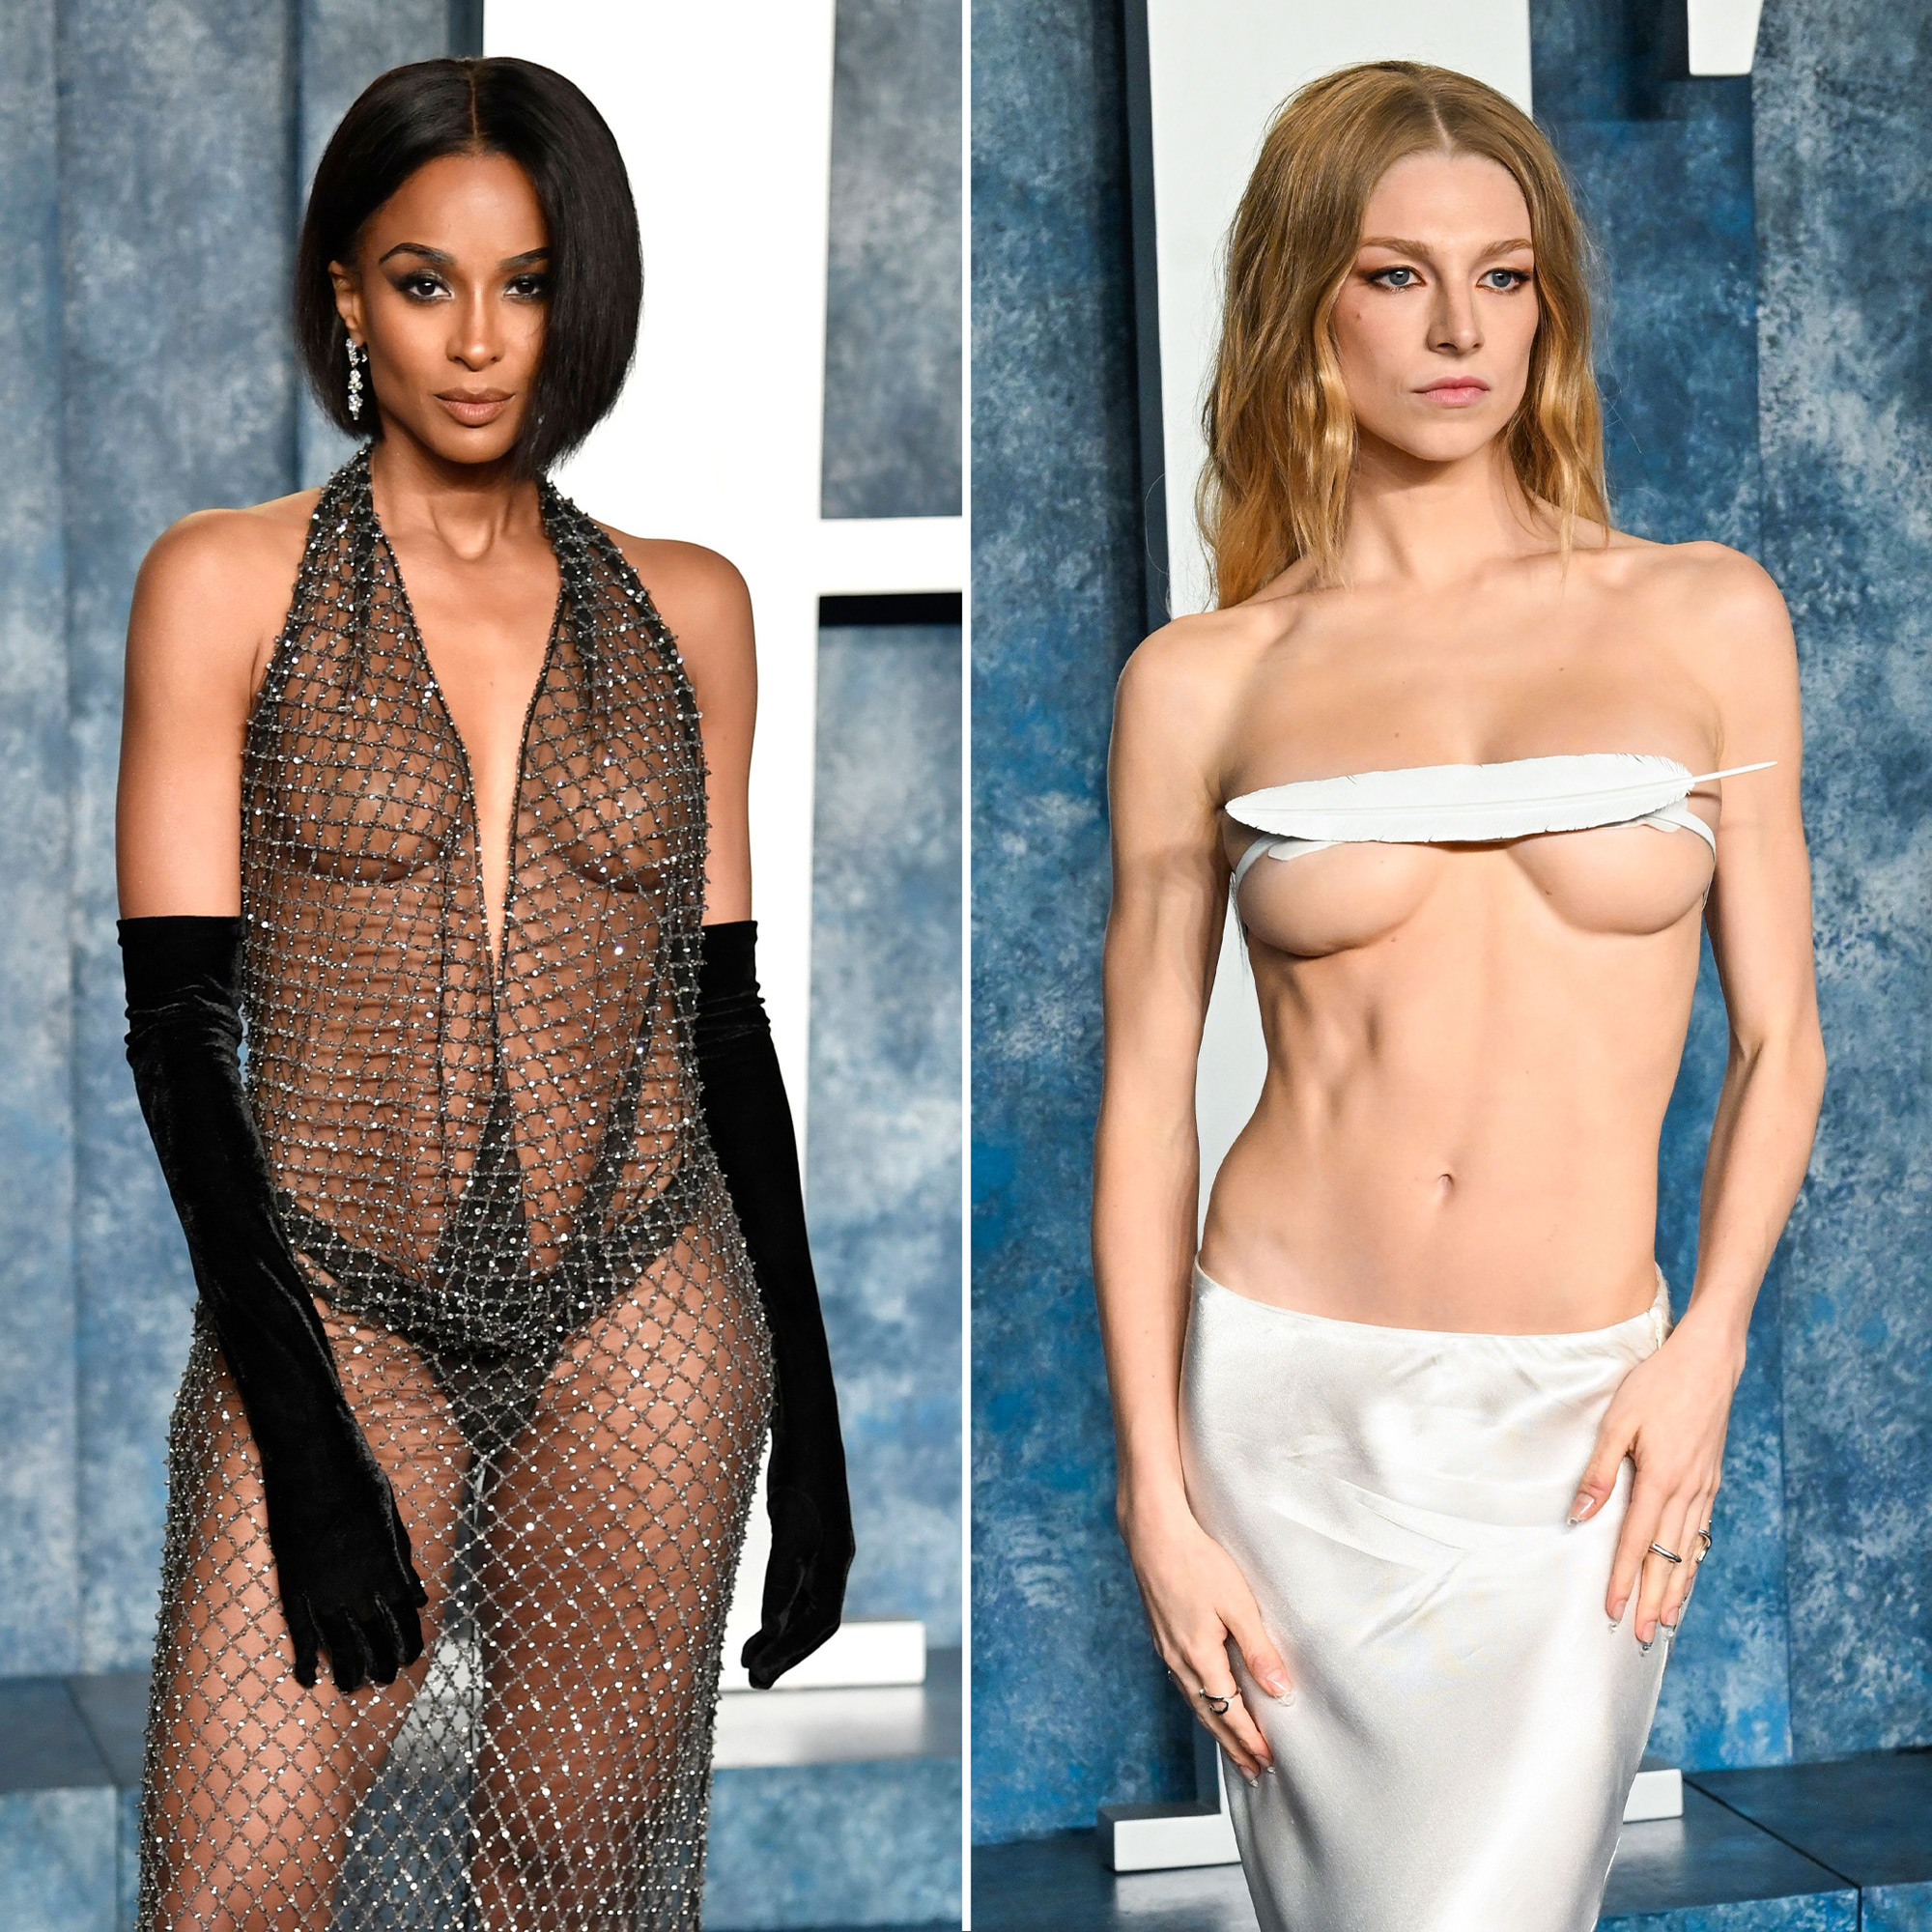 Group Leotard Party Naked Nude - Celebs Boldest Nearly Naked Red Carpet Looks of All Time